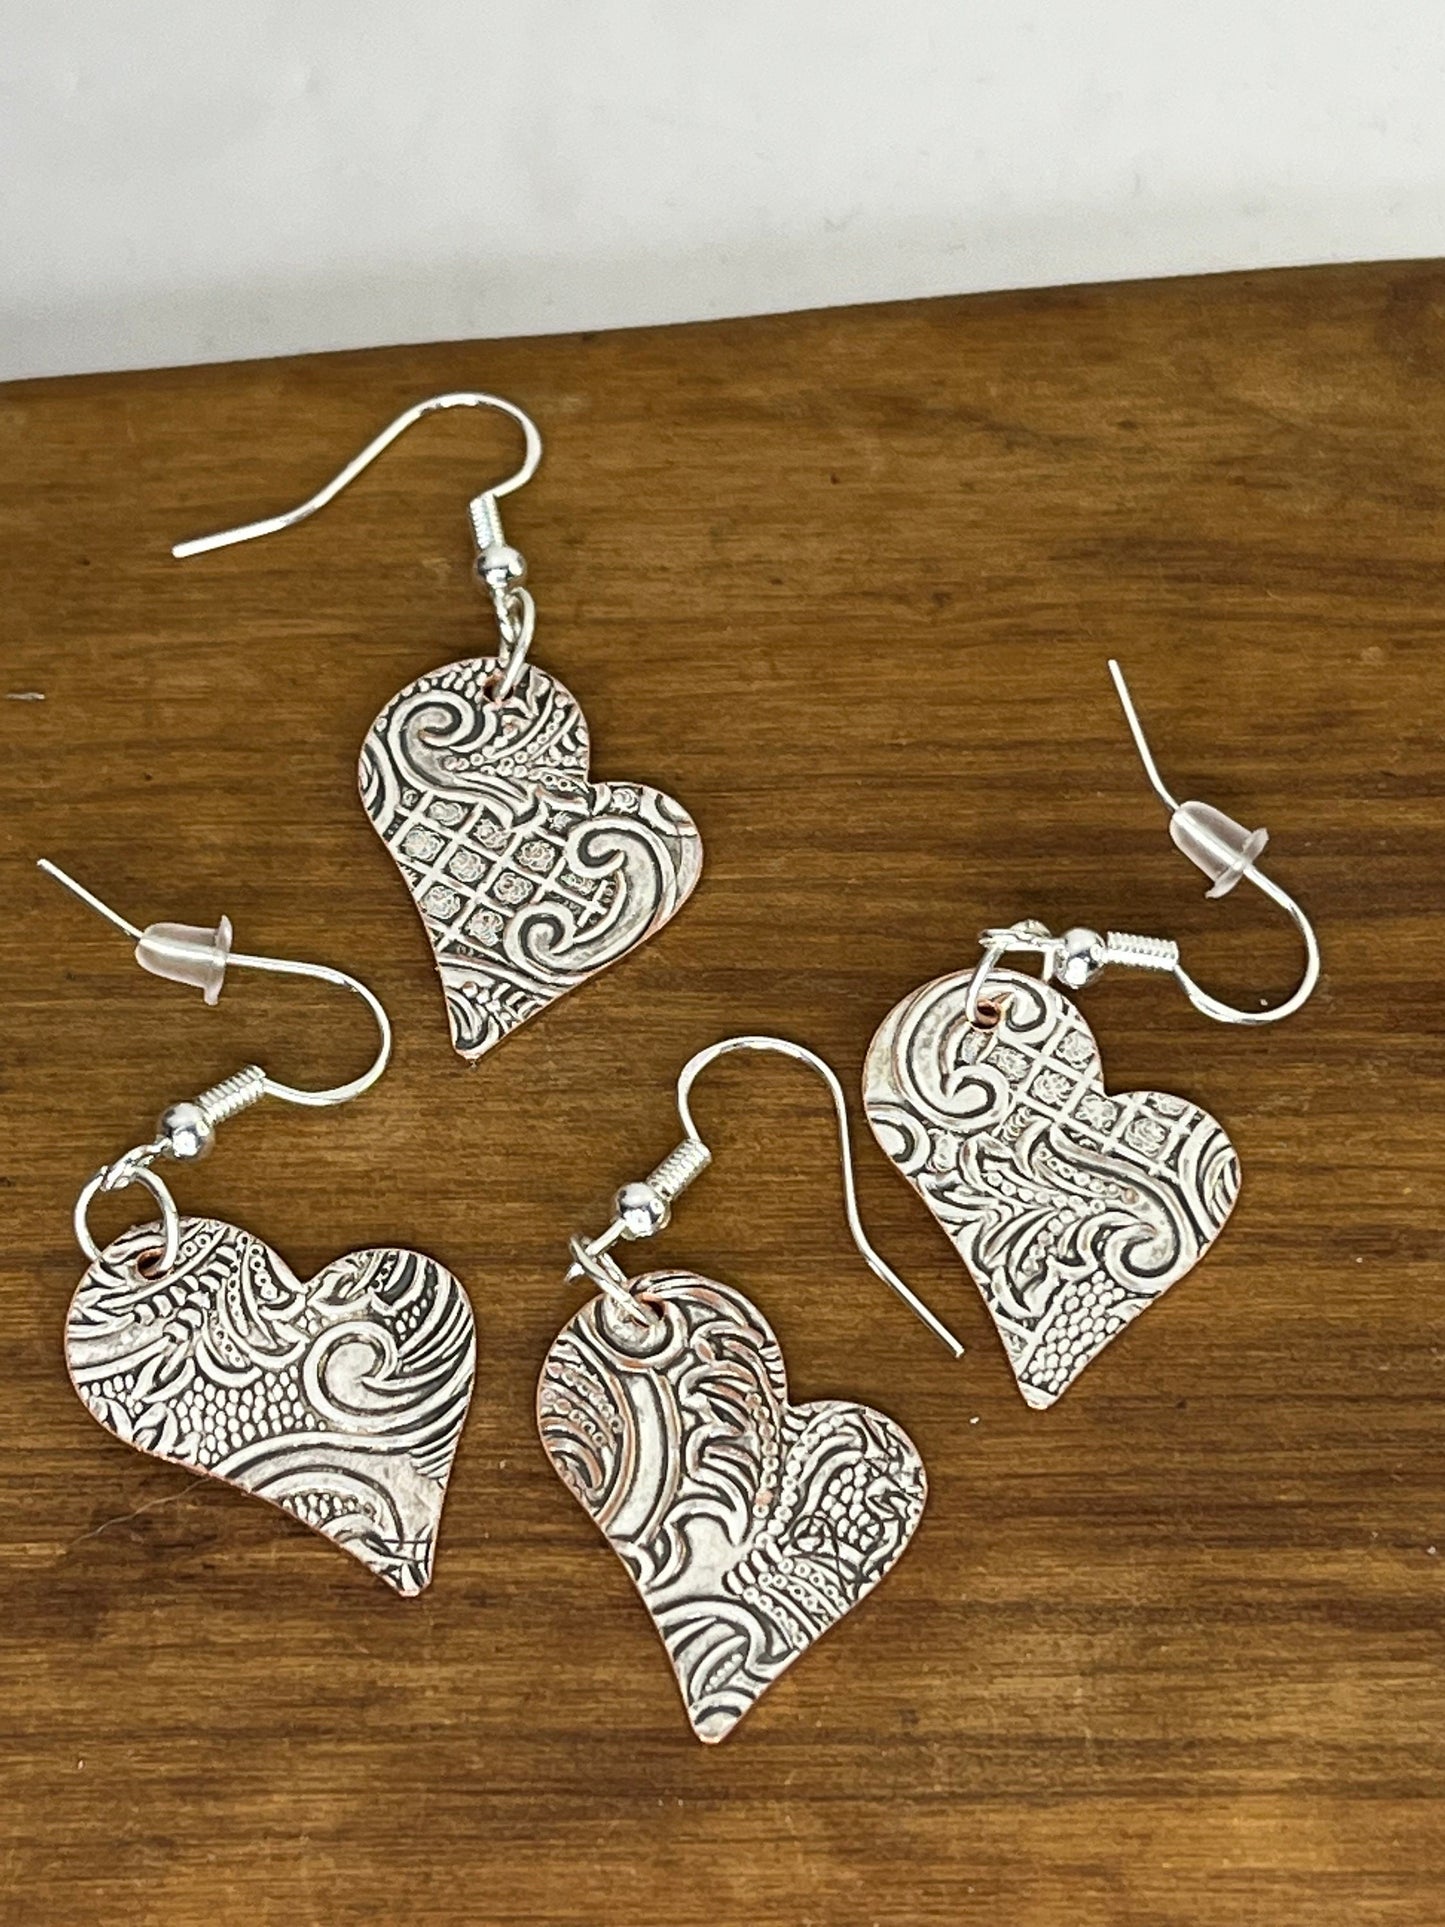 Silver Earrings made from vintage silver plated trays, Silverware Jewelry, Unique Gift for her, Silver Drop Earrings